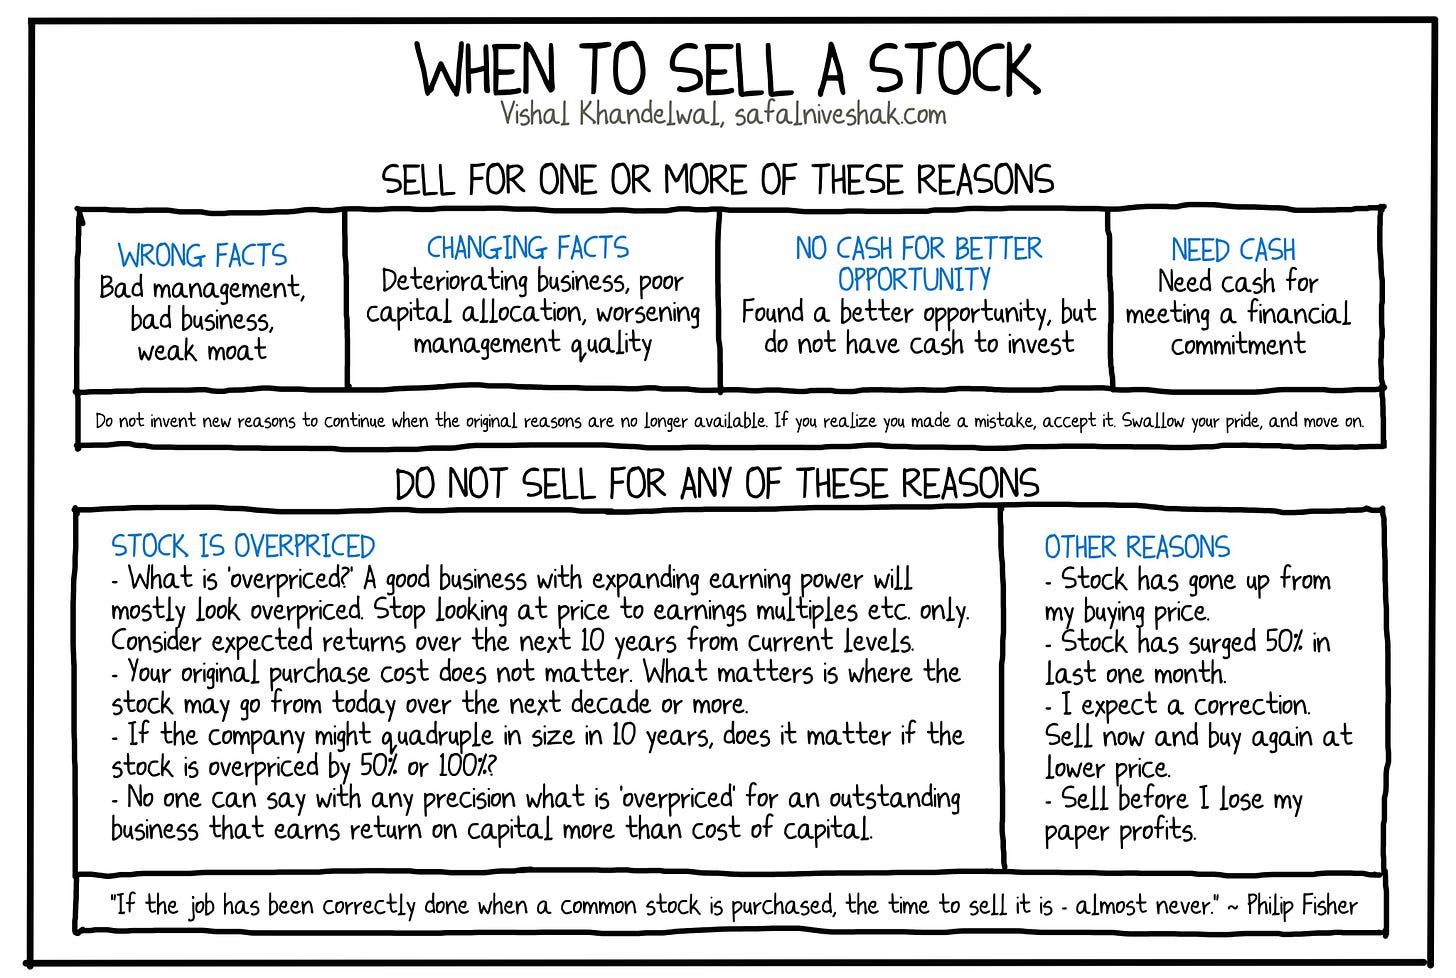 Vishal Khandelwal on Twitter: "Of course, the possibility that one or all  of these reasons may warrant a sale or switch to a better stock should be  weighed carefully. But making a